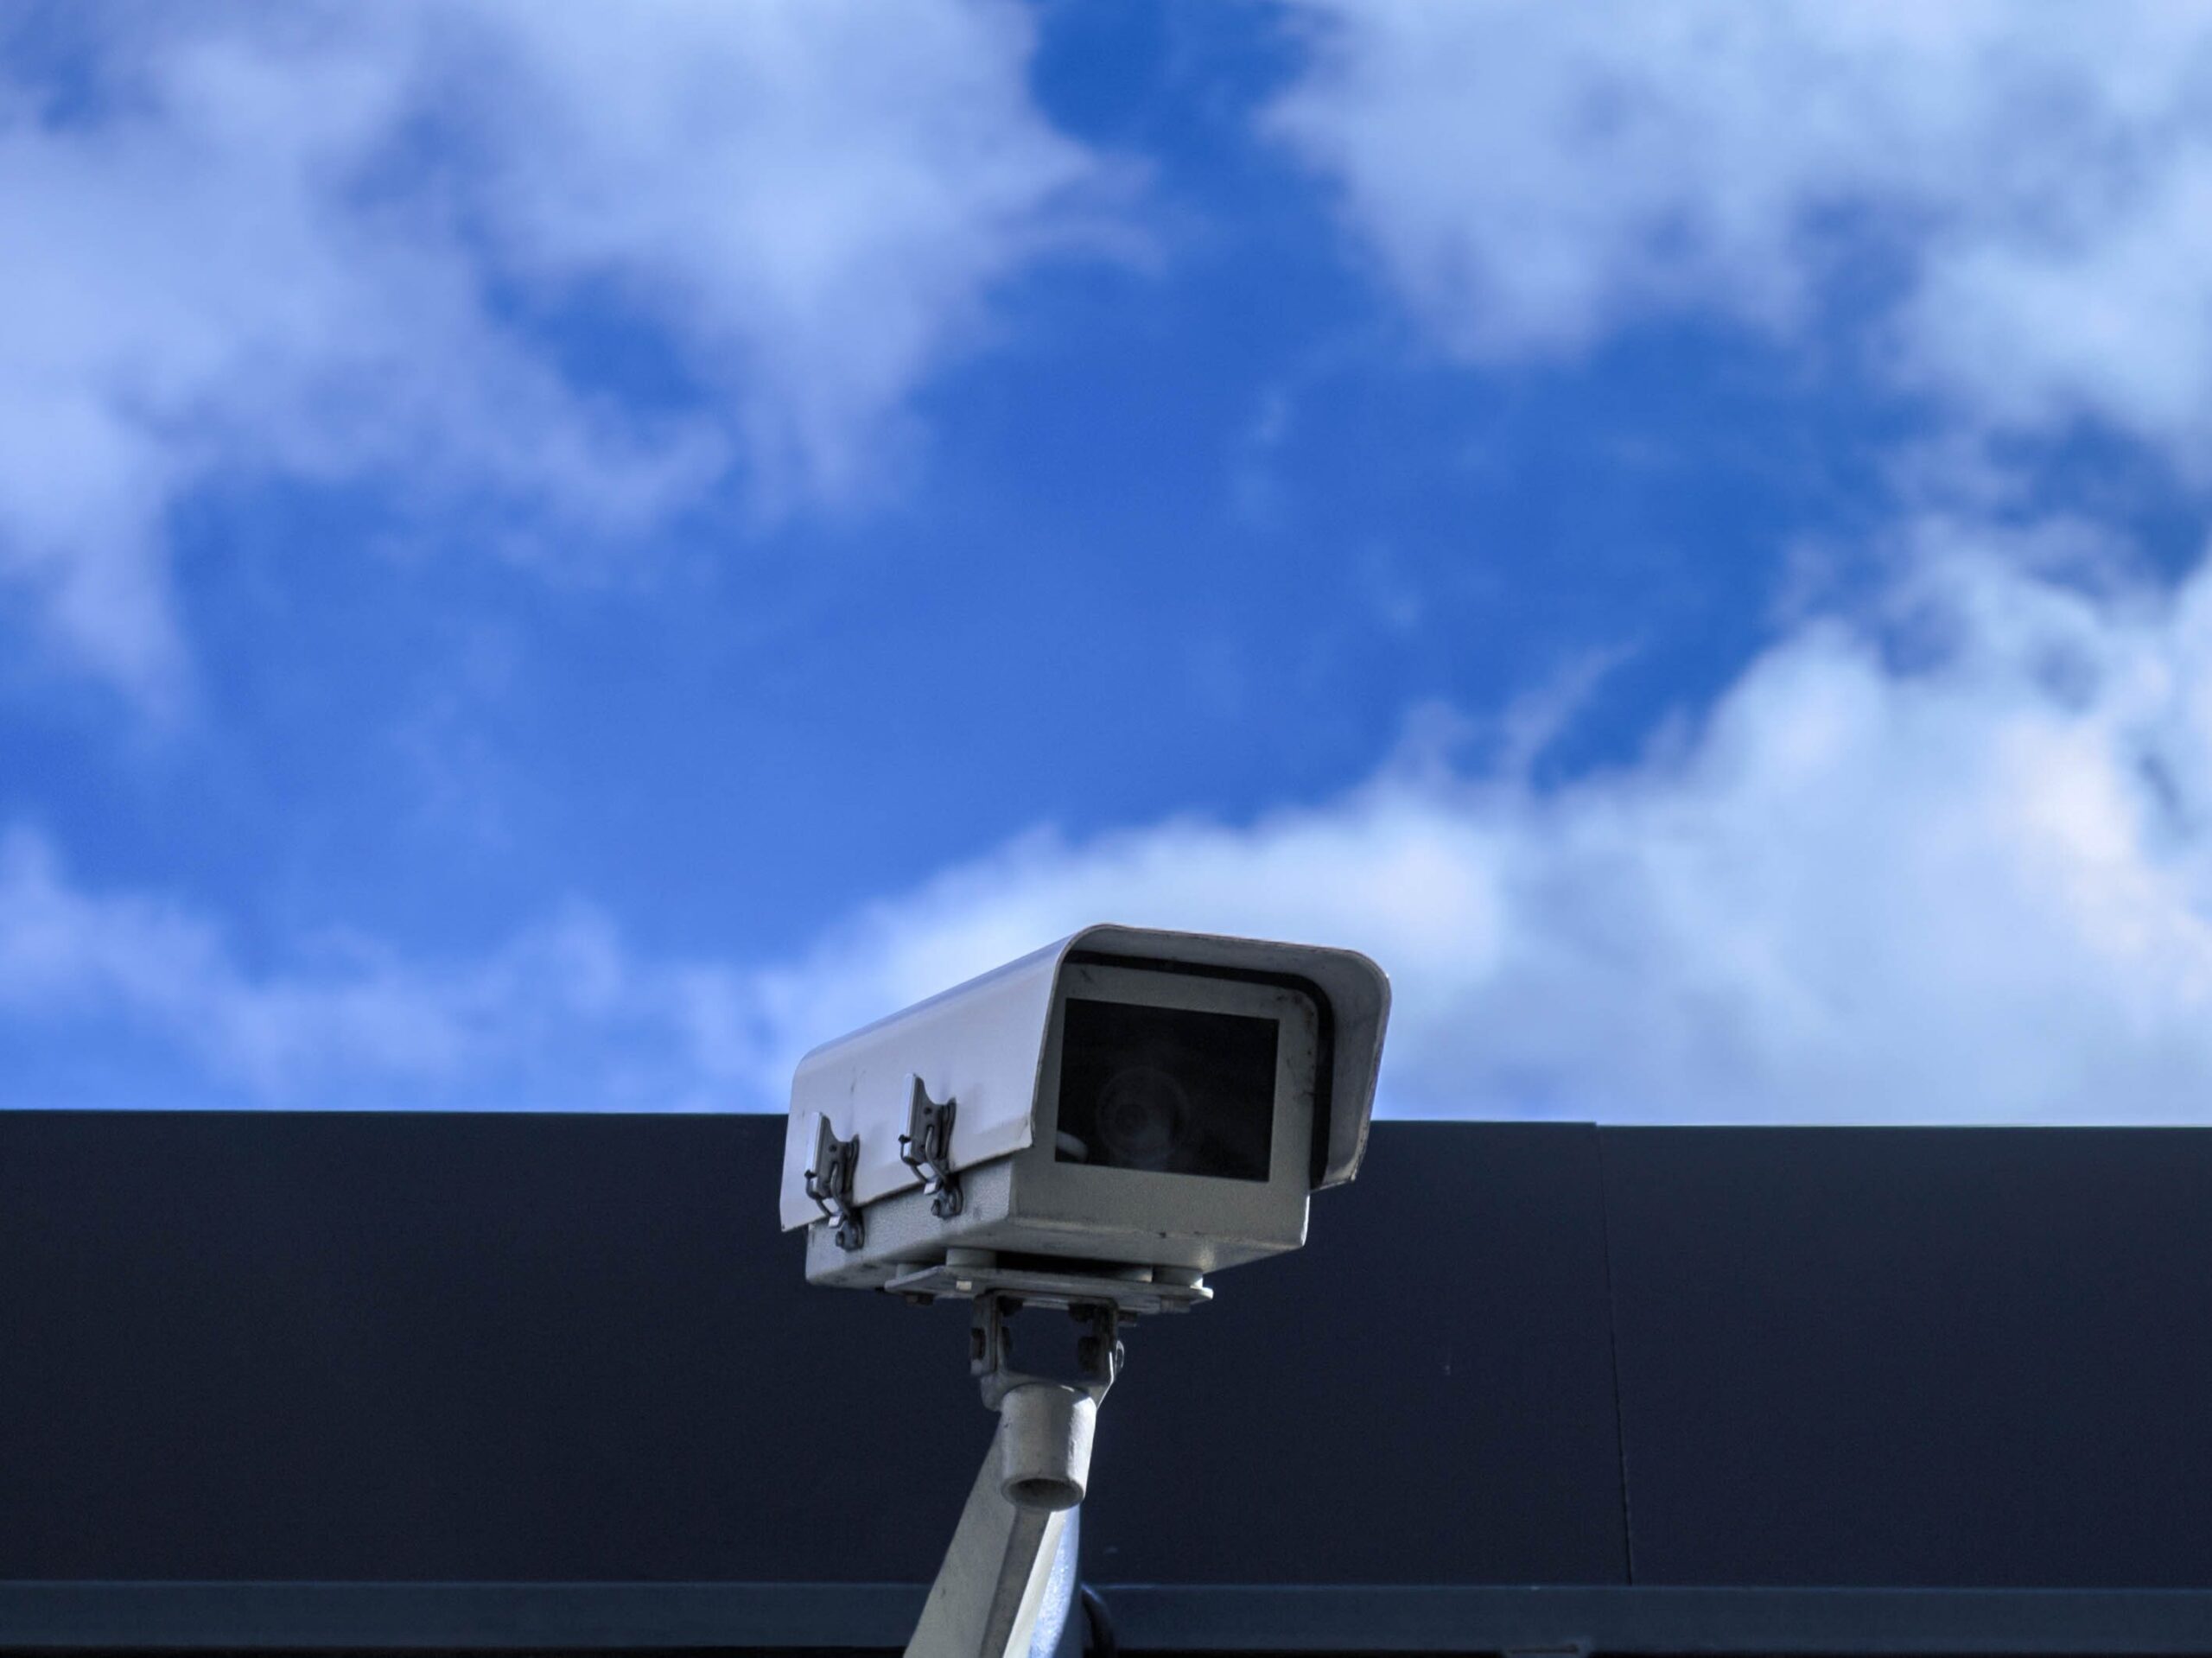 Security Cameras can deter crimes from even happening